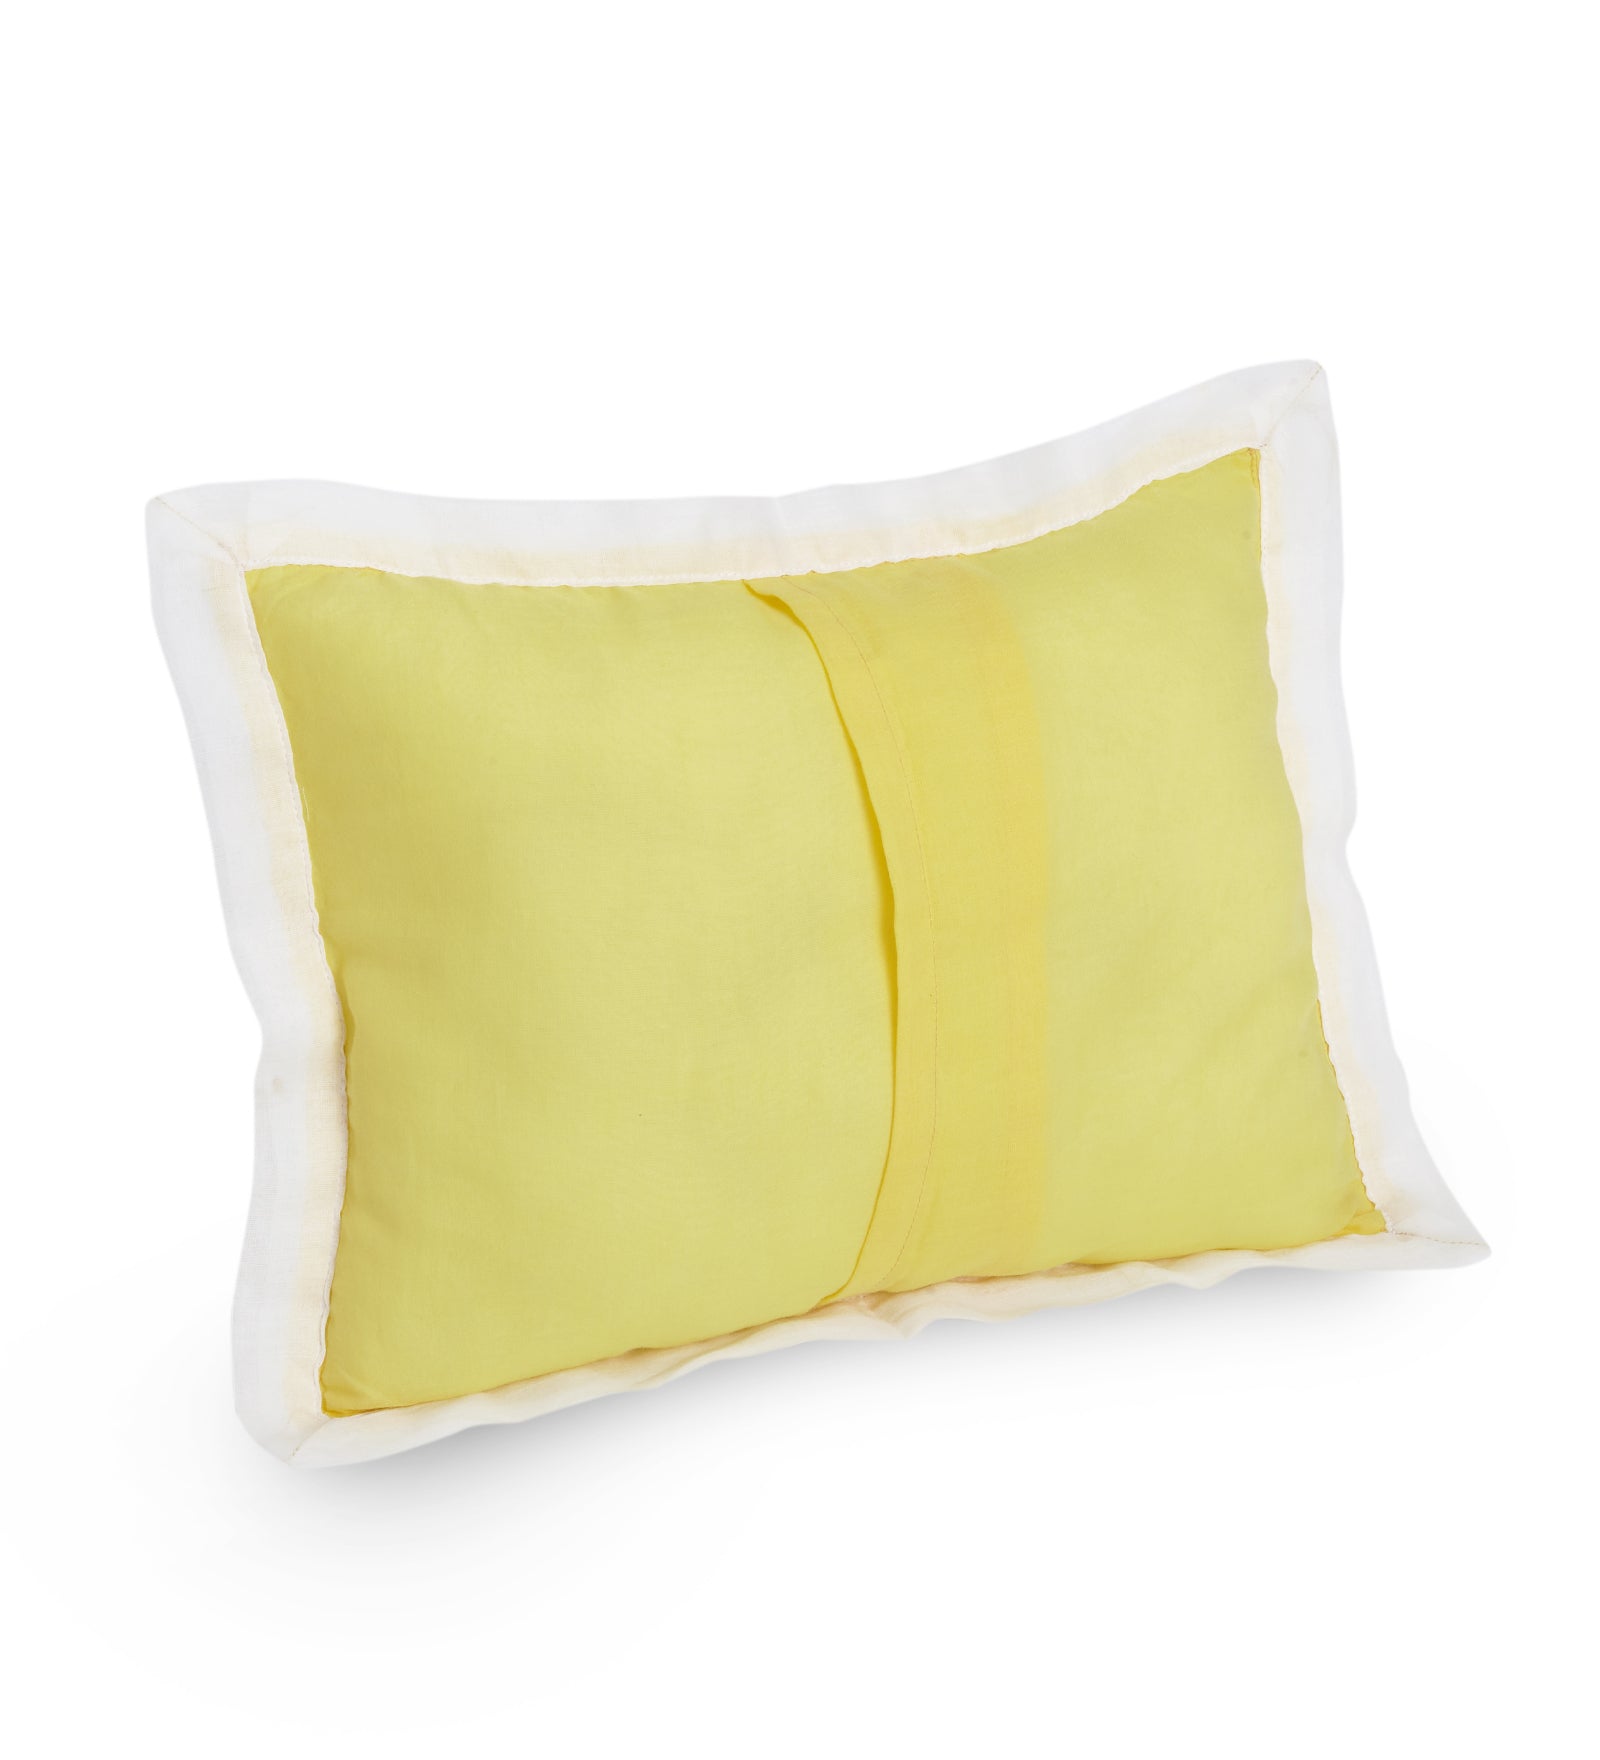 The White Cradle Cot Pillow + 2 Bolsters Set with Fillers - Solid Yellow